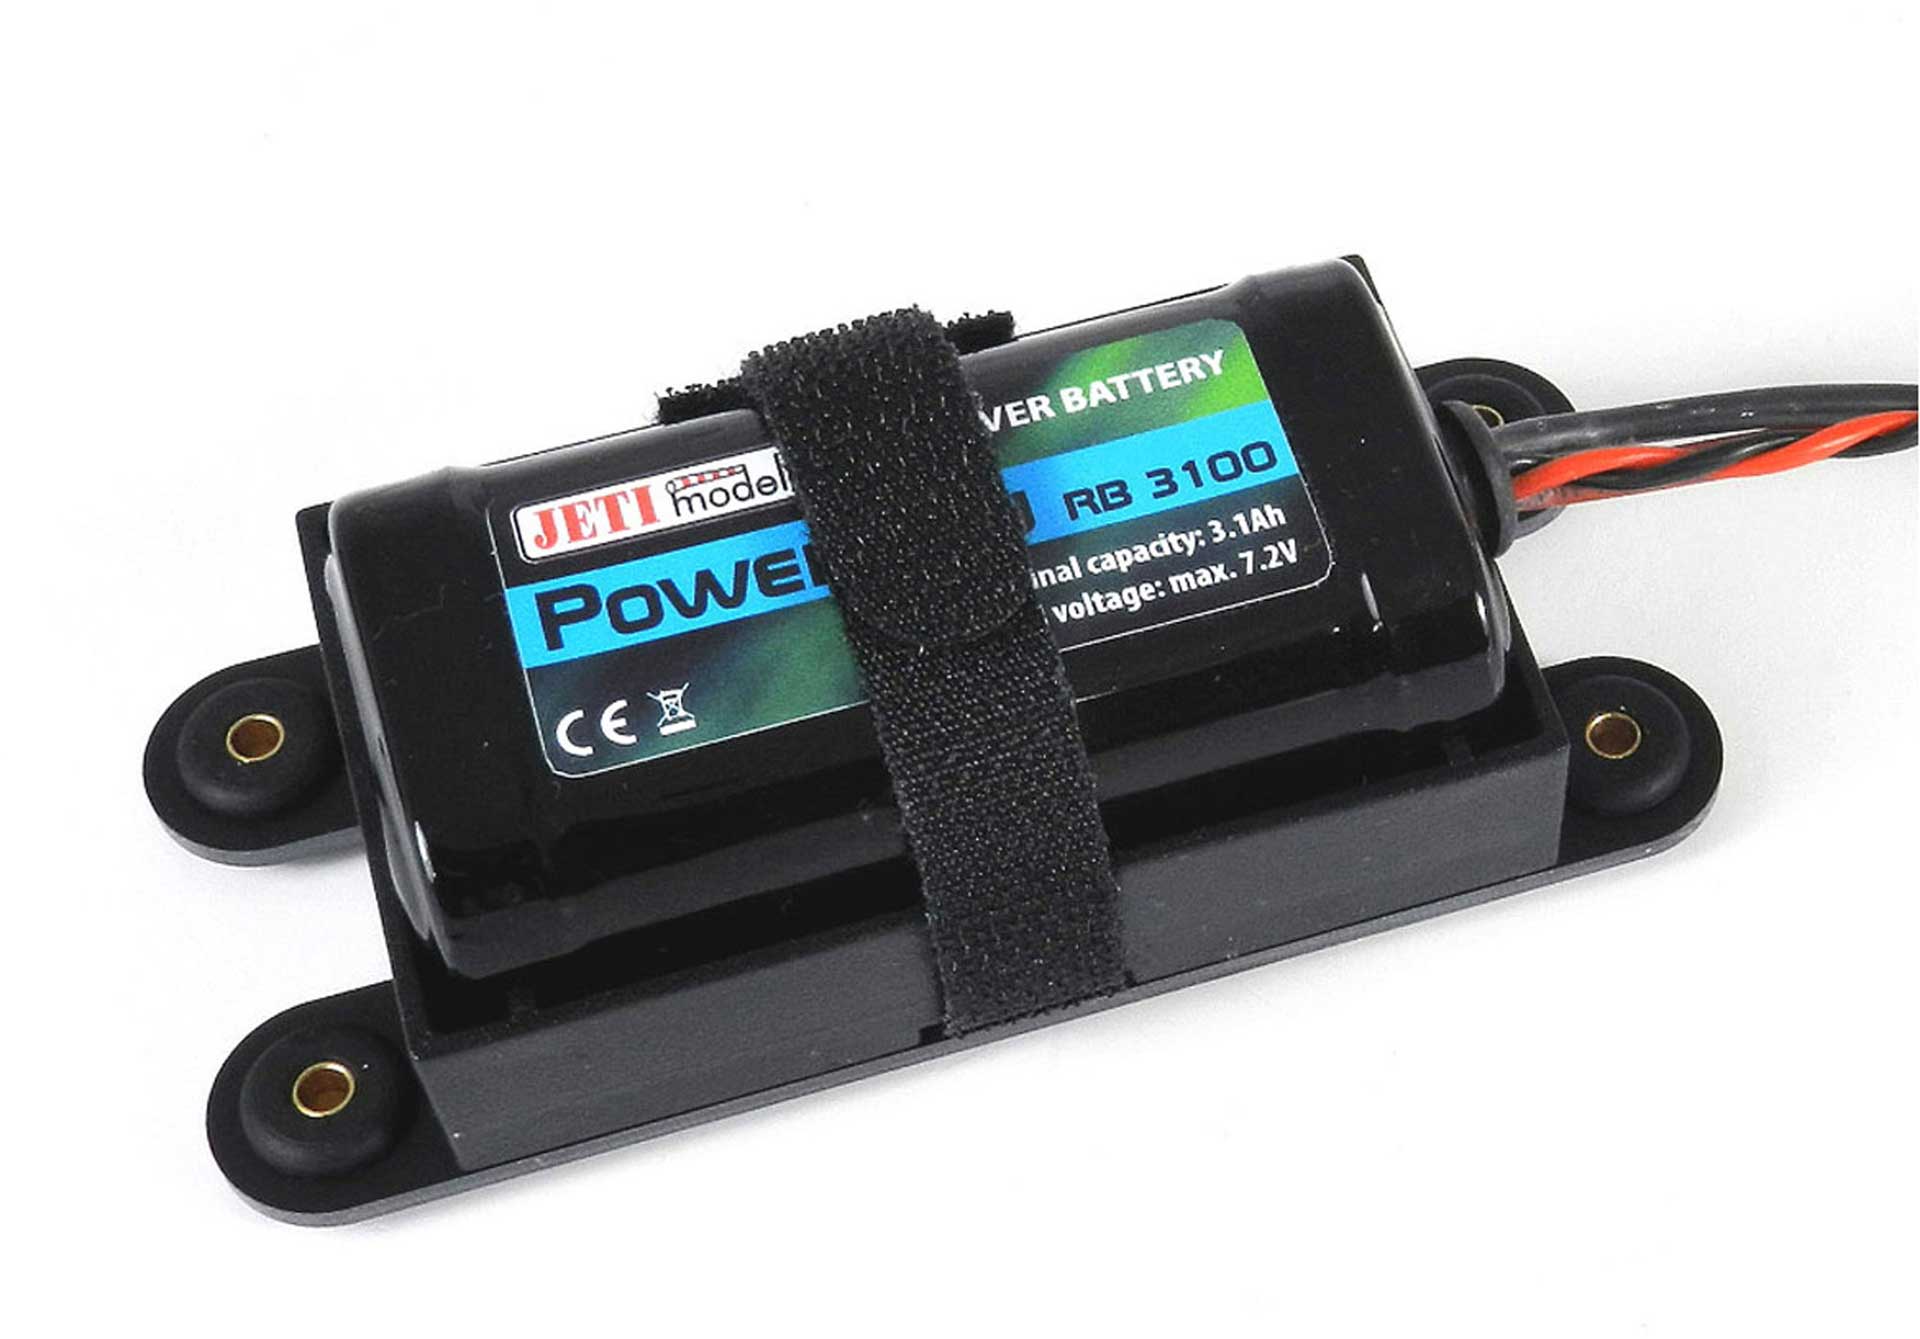 JETI RECEIVER BATTERY POWER ION 3100 MAH 2S1P 7.2 VOLT MPX AND JR CABLES